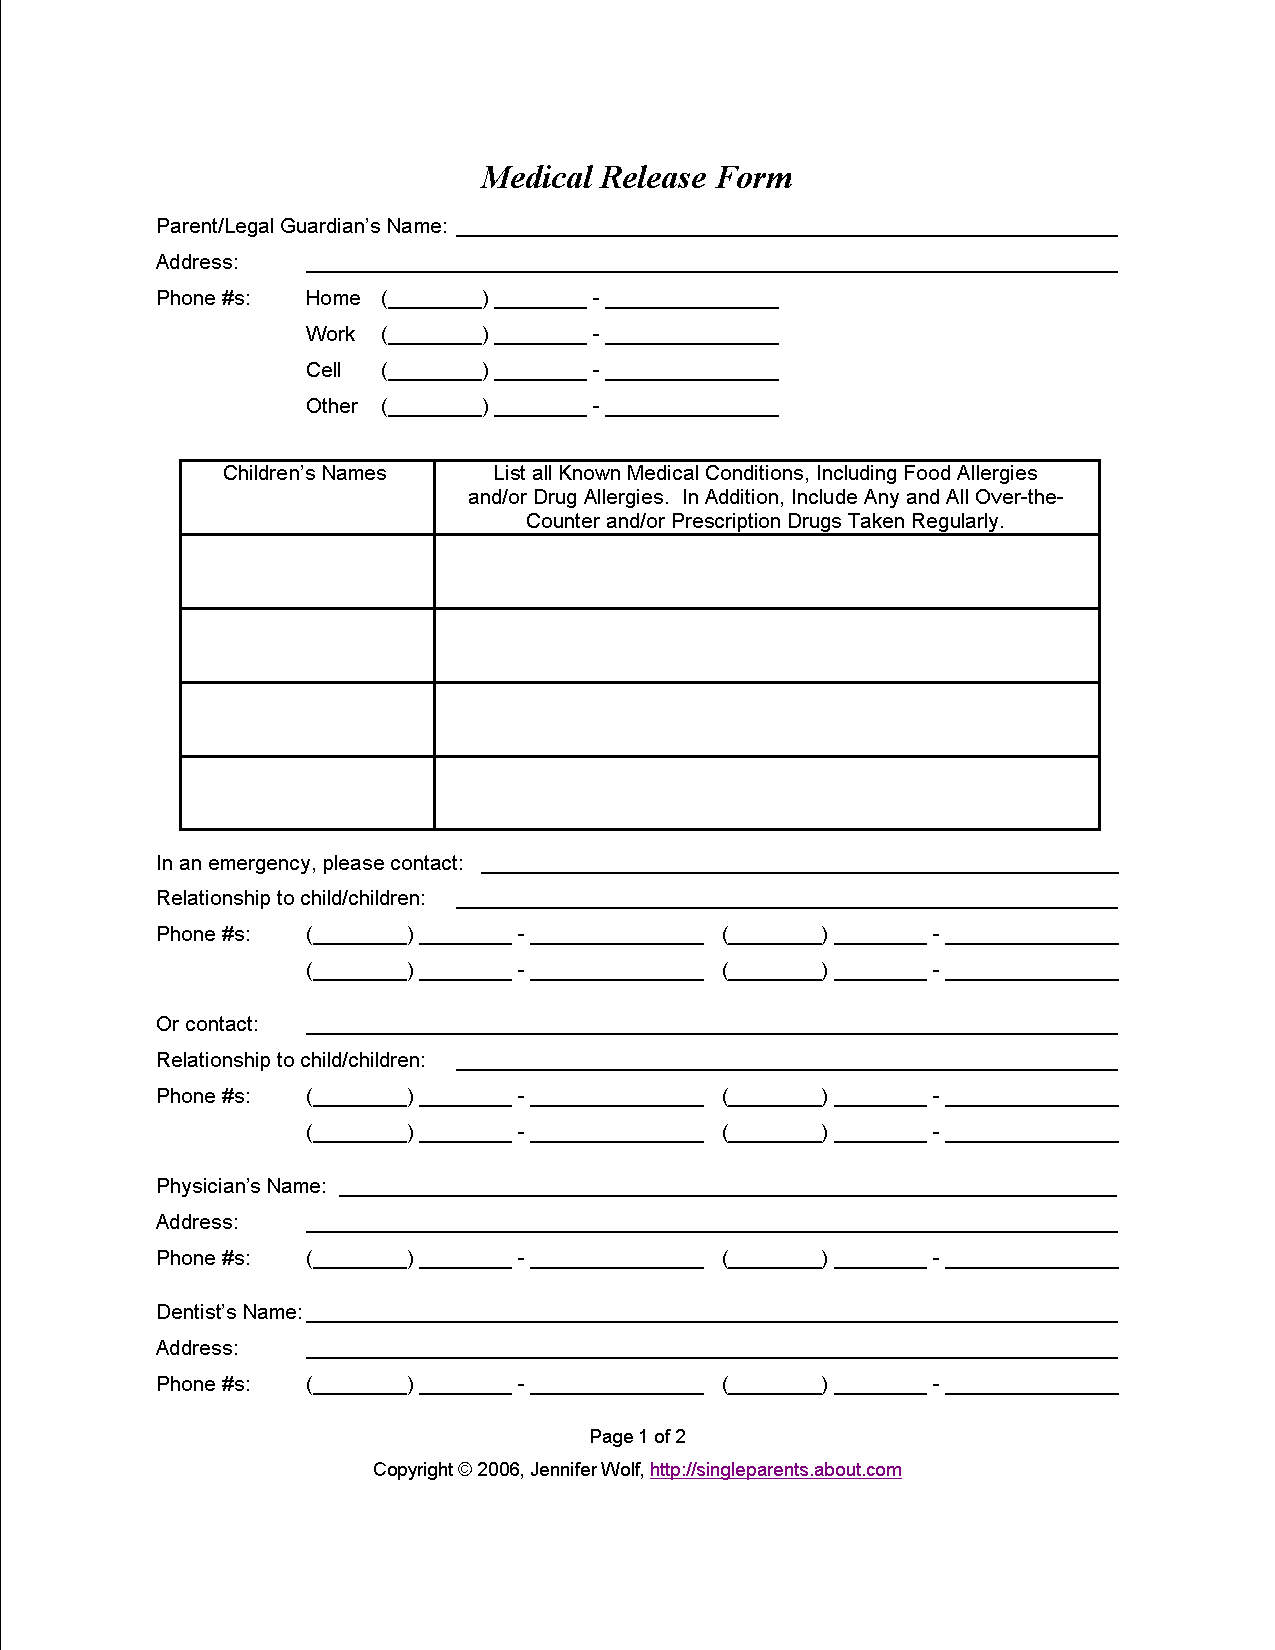 Do You Have A Medical Release Form For Your Kids? | Travel - Free Printable Caregiver Forms